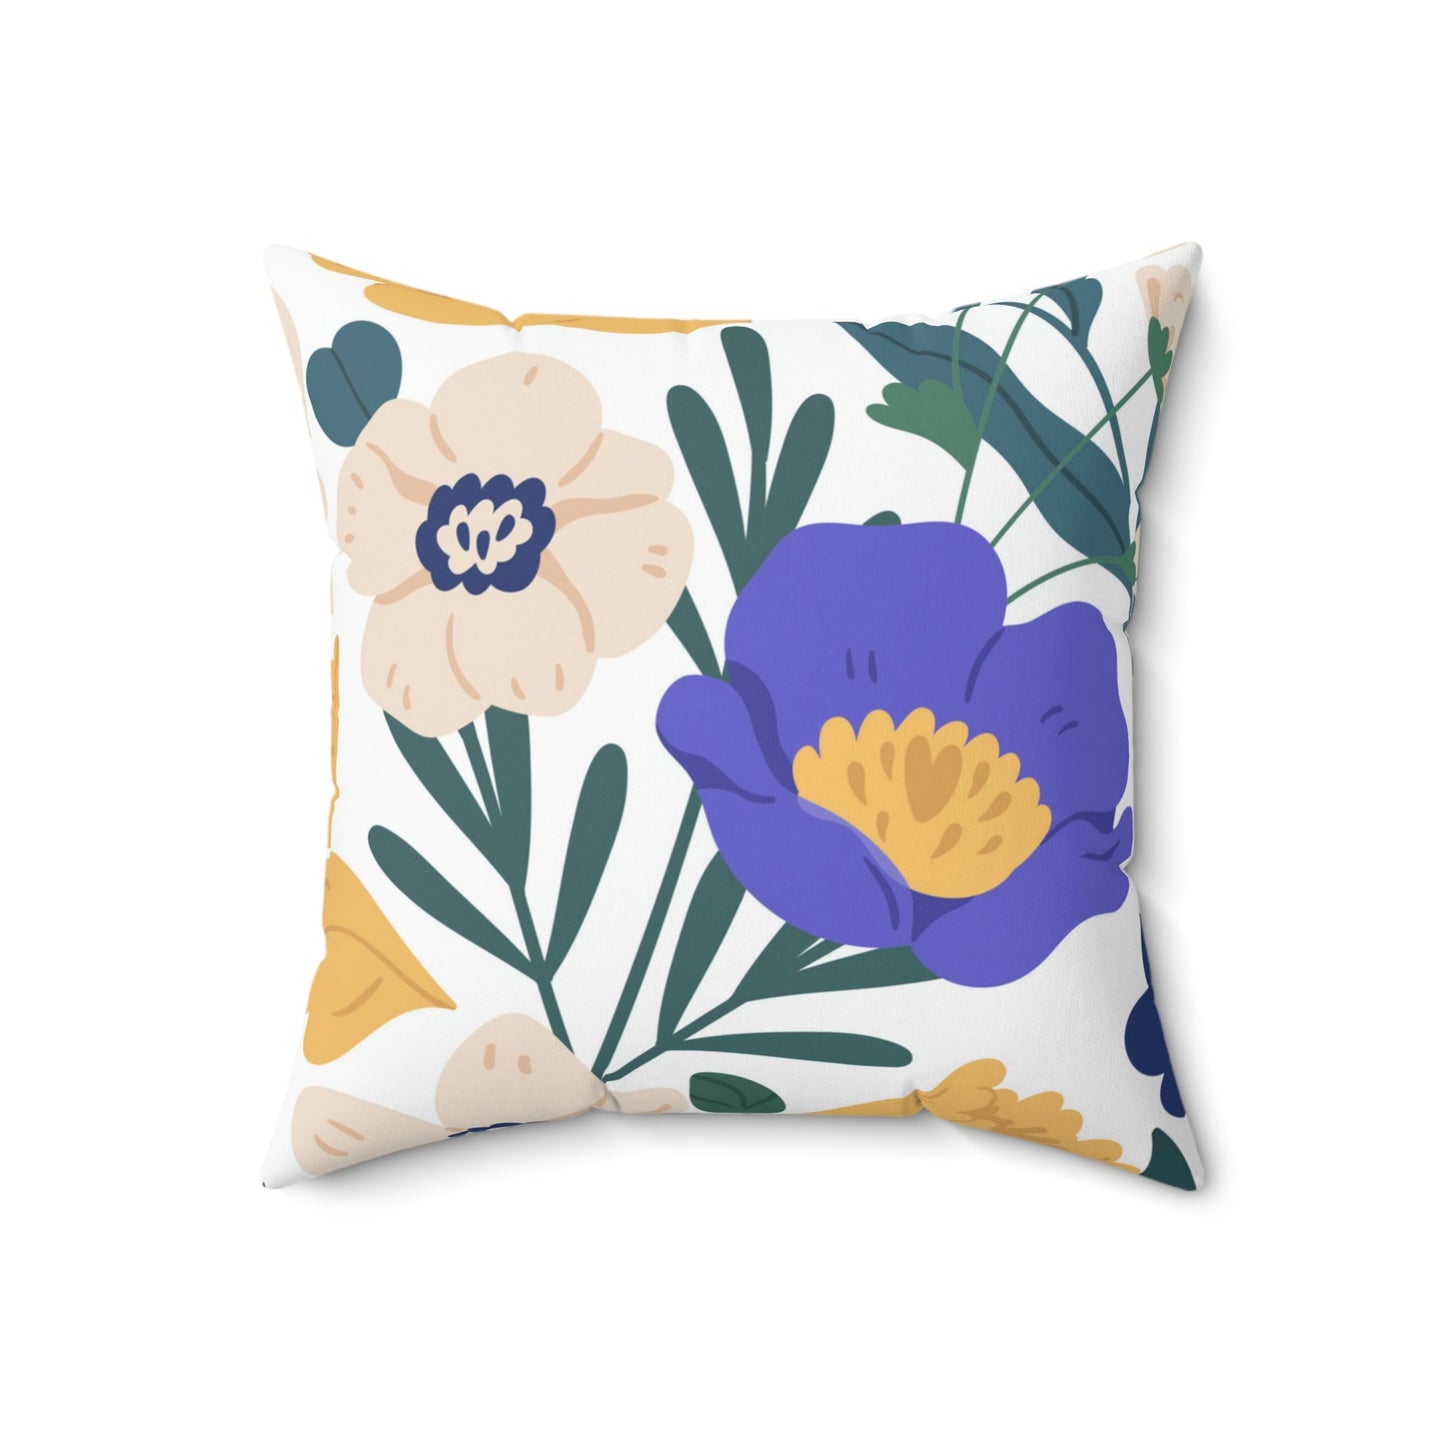 Blue and Gold Florals Square Pillow Home Decor Pink Sweetheart